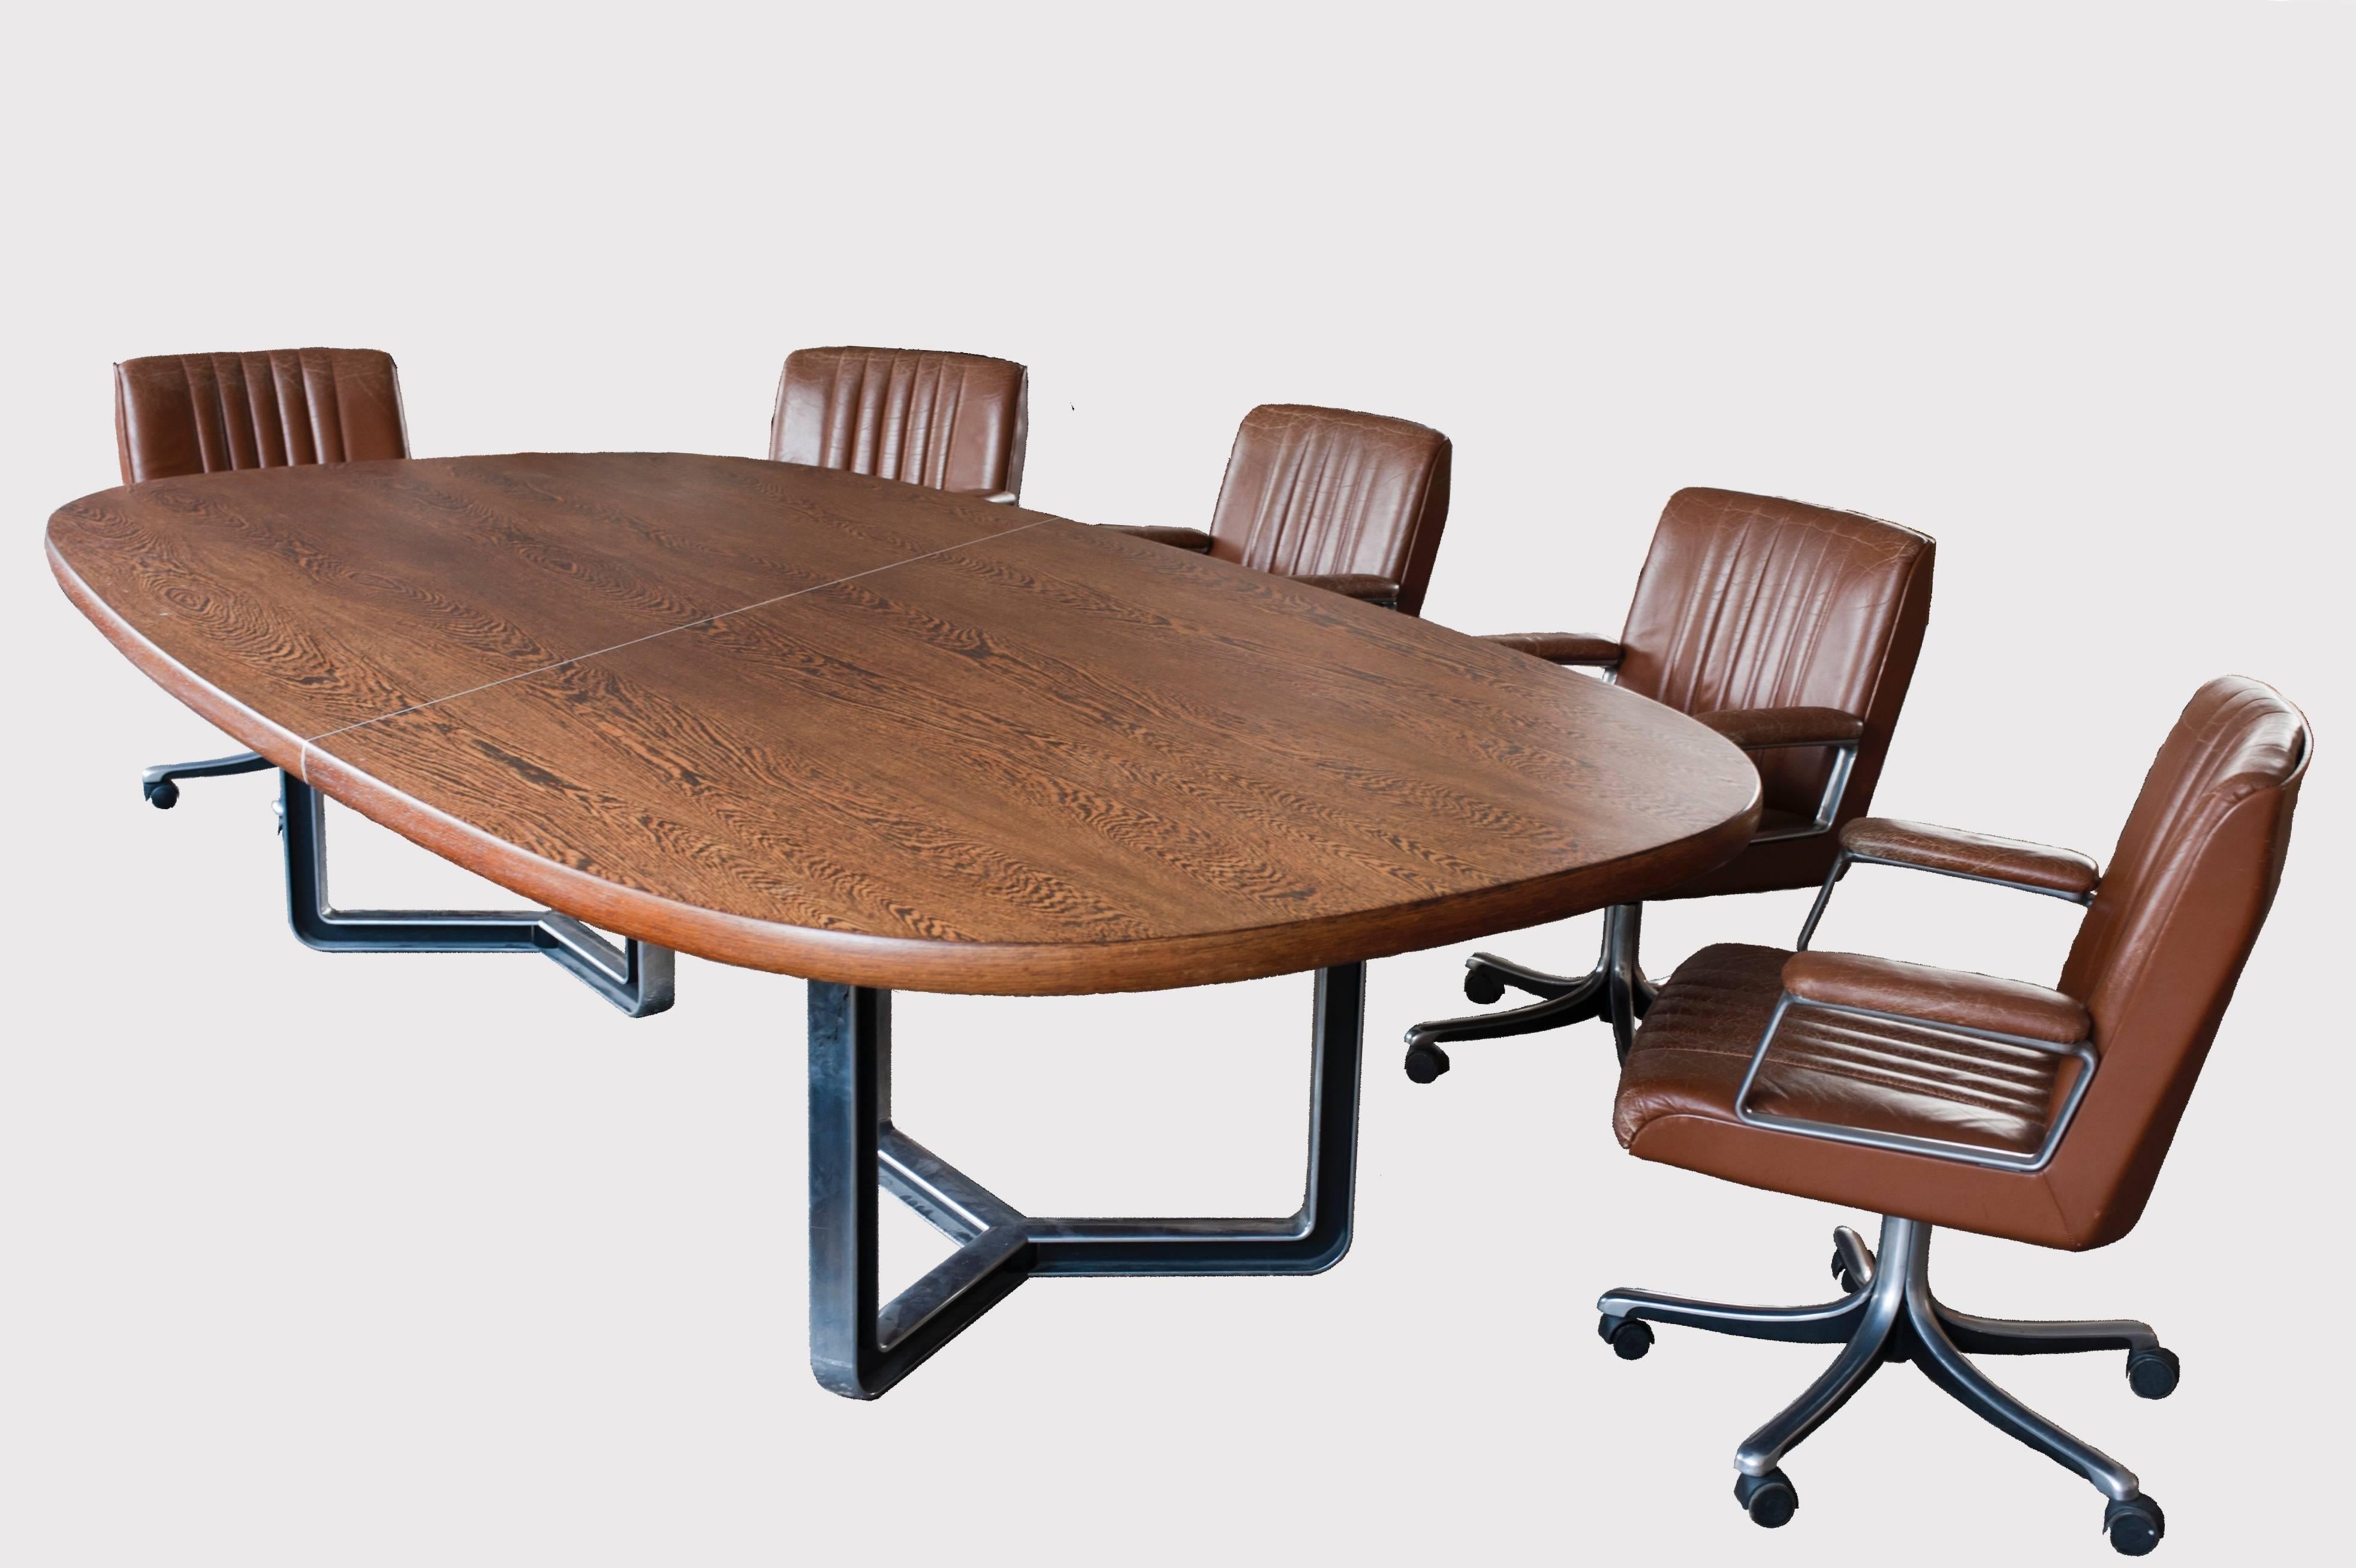 Cast Conference or Dining Room Table by Osvaldo Borsani